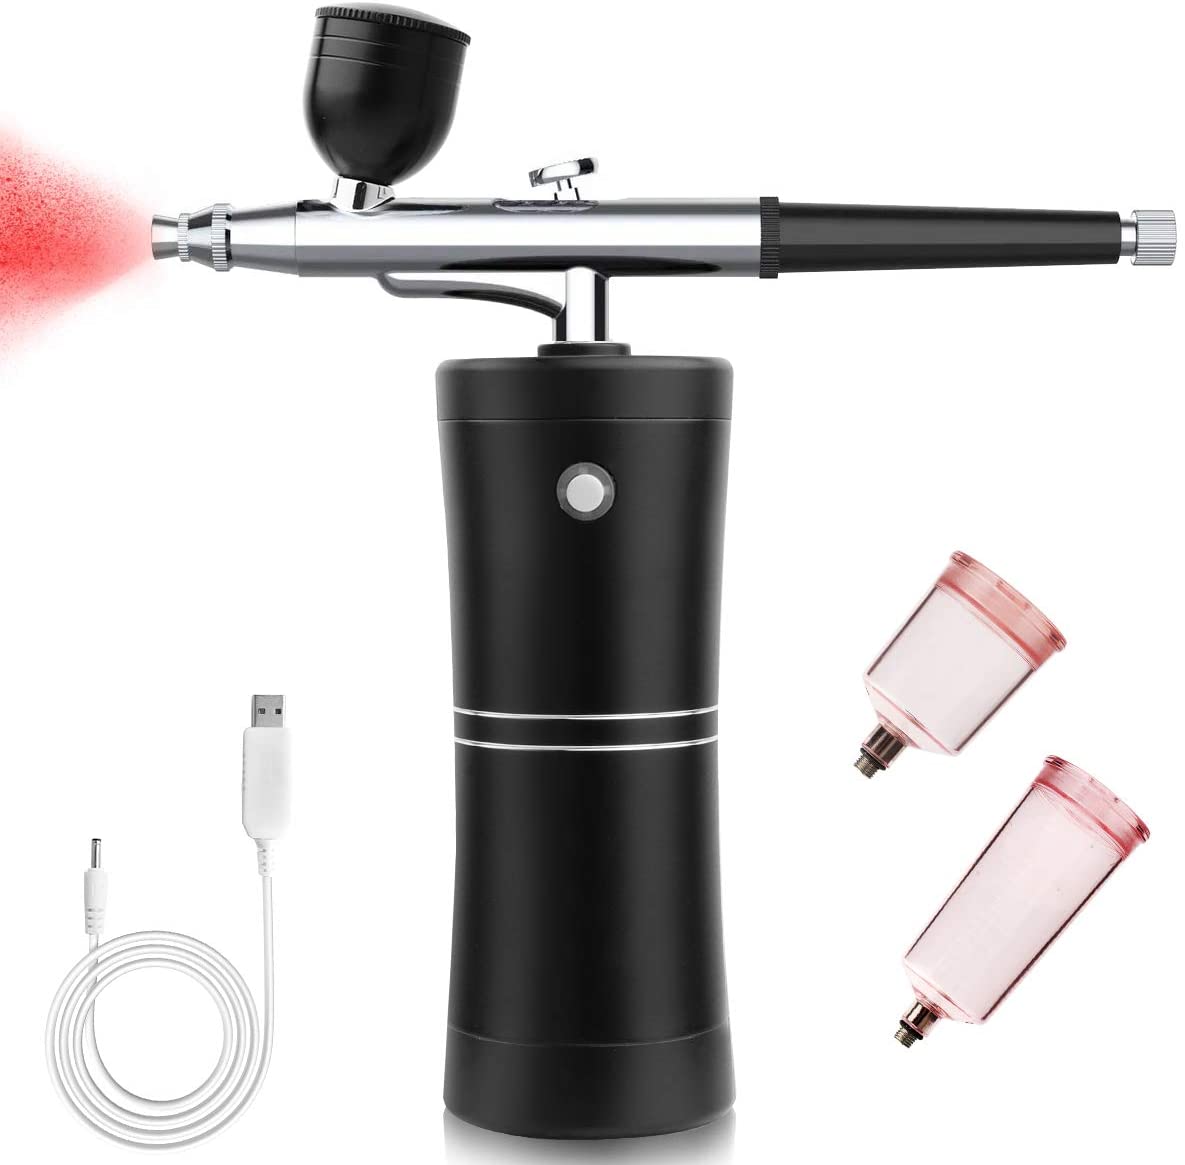 Cinlinso Airbrush Kit, Rechargeable Cordless Airbrush Compressor